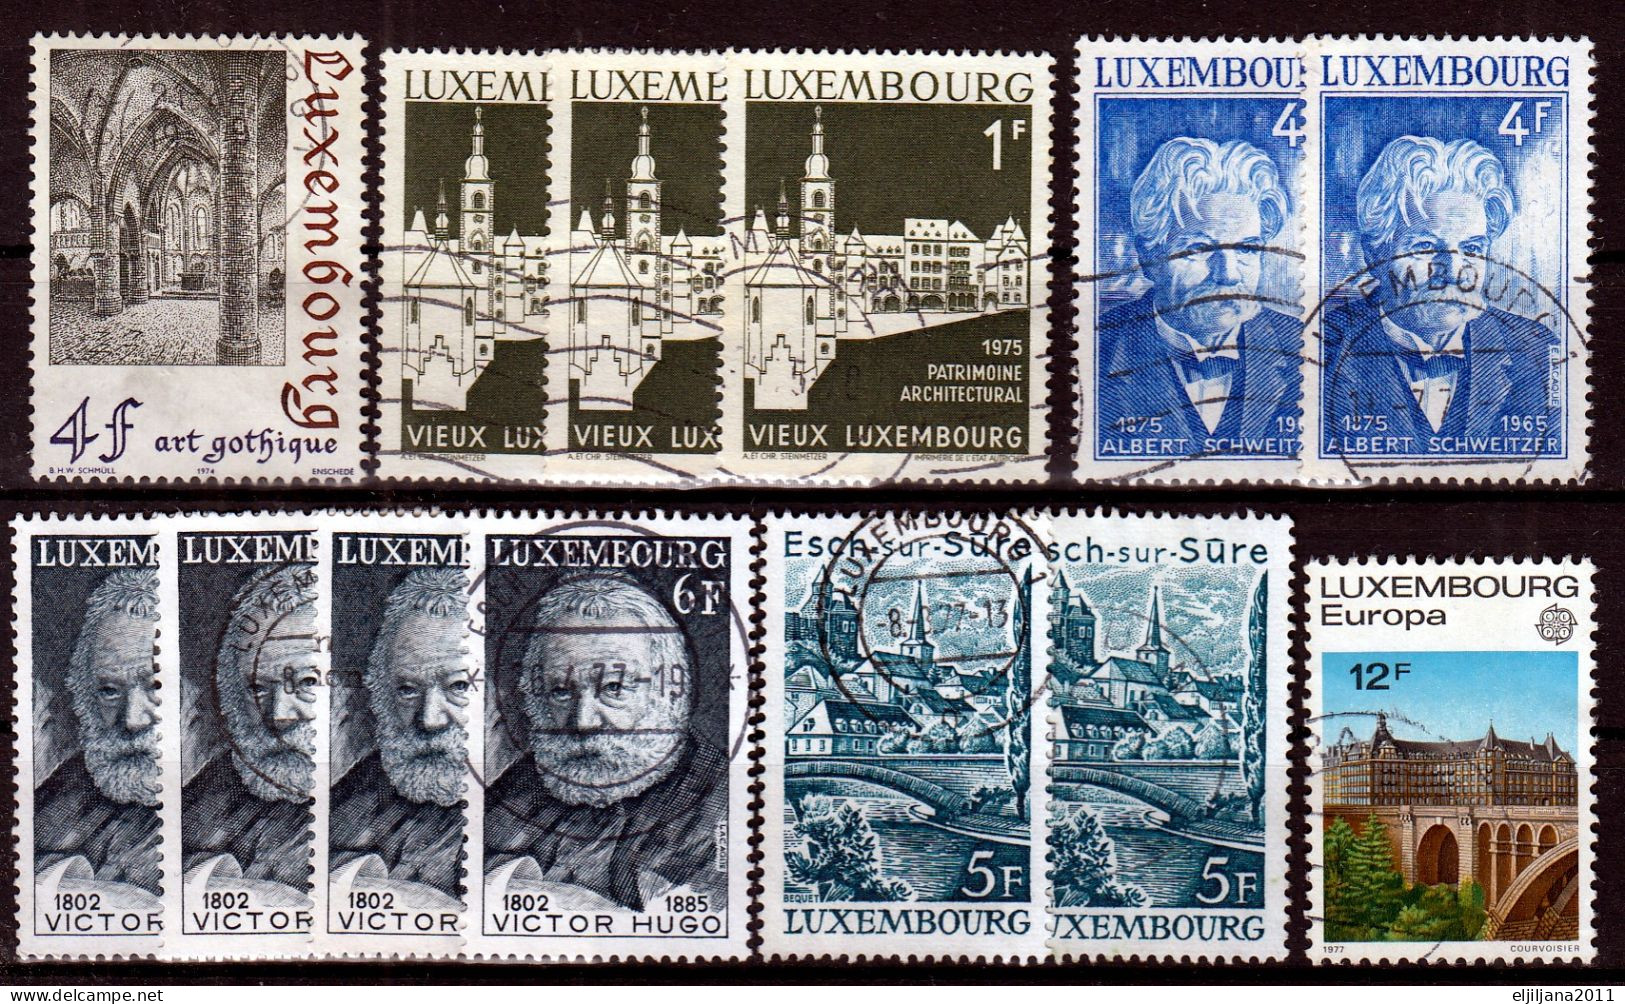 ⁕ LUXEMBOURG 1939 - 1983 ⁕ nice collection / lot ⁕ 155v used stamps - see all scans